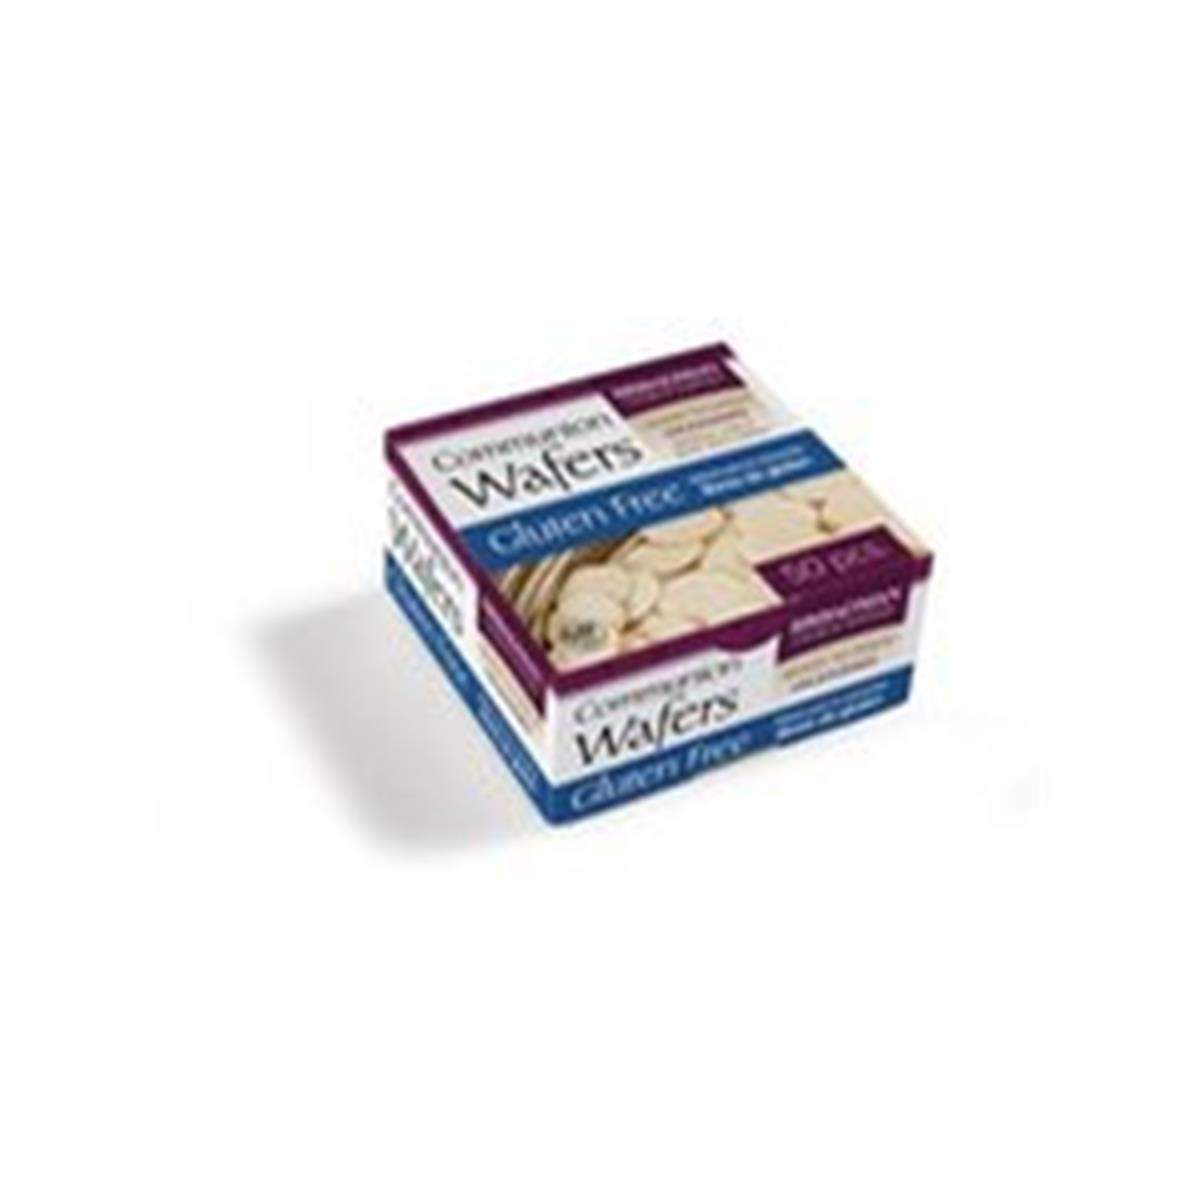 Picture of B & H Publishing 144320 Communion-Wafer Baked Gluten Free Rounds - Pack of 50